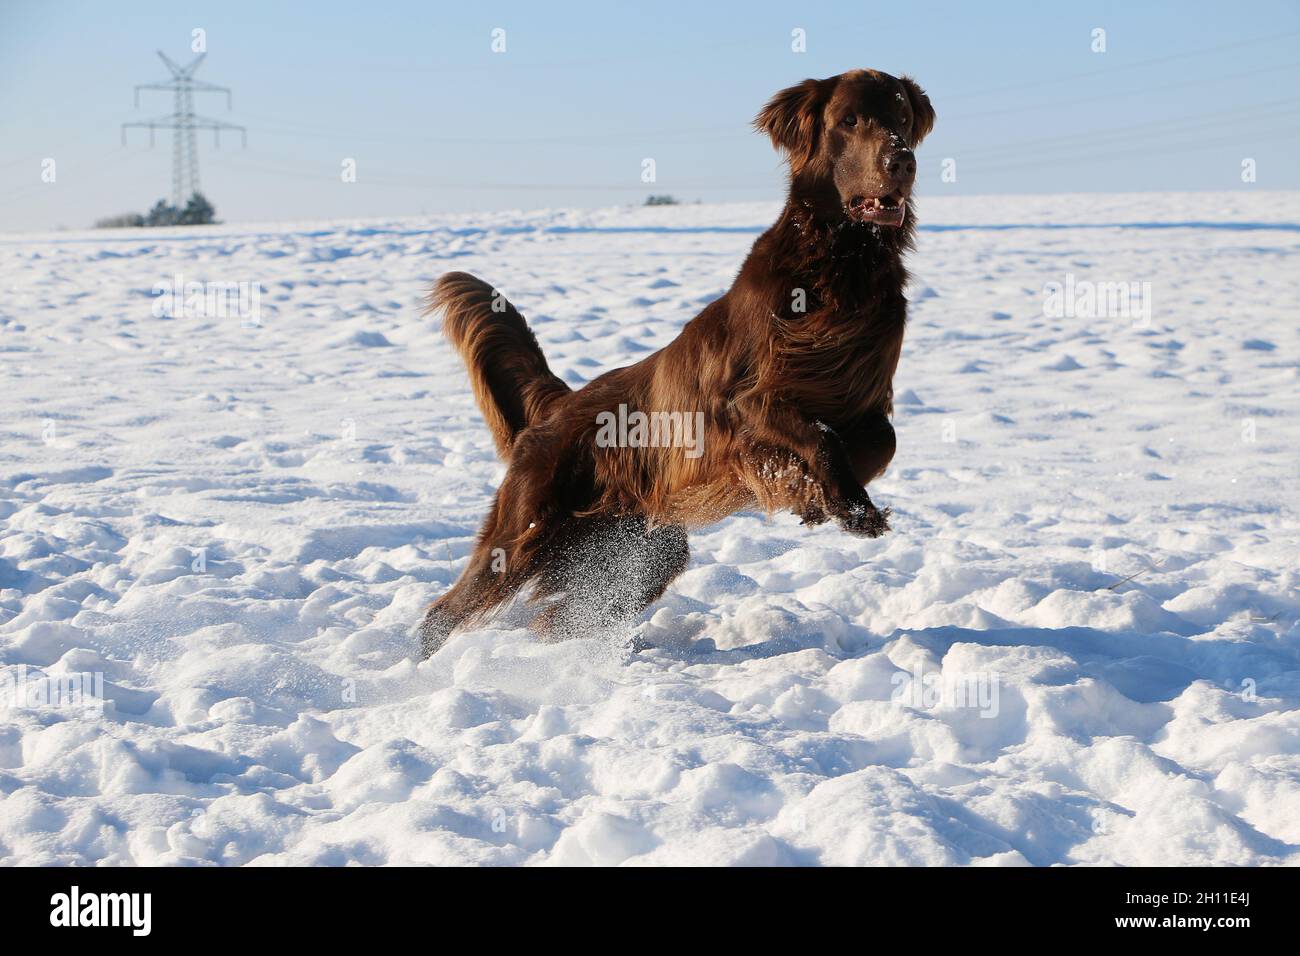 Portrait of a brown dog running in the snow. Stock Photo